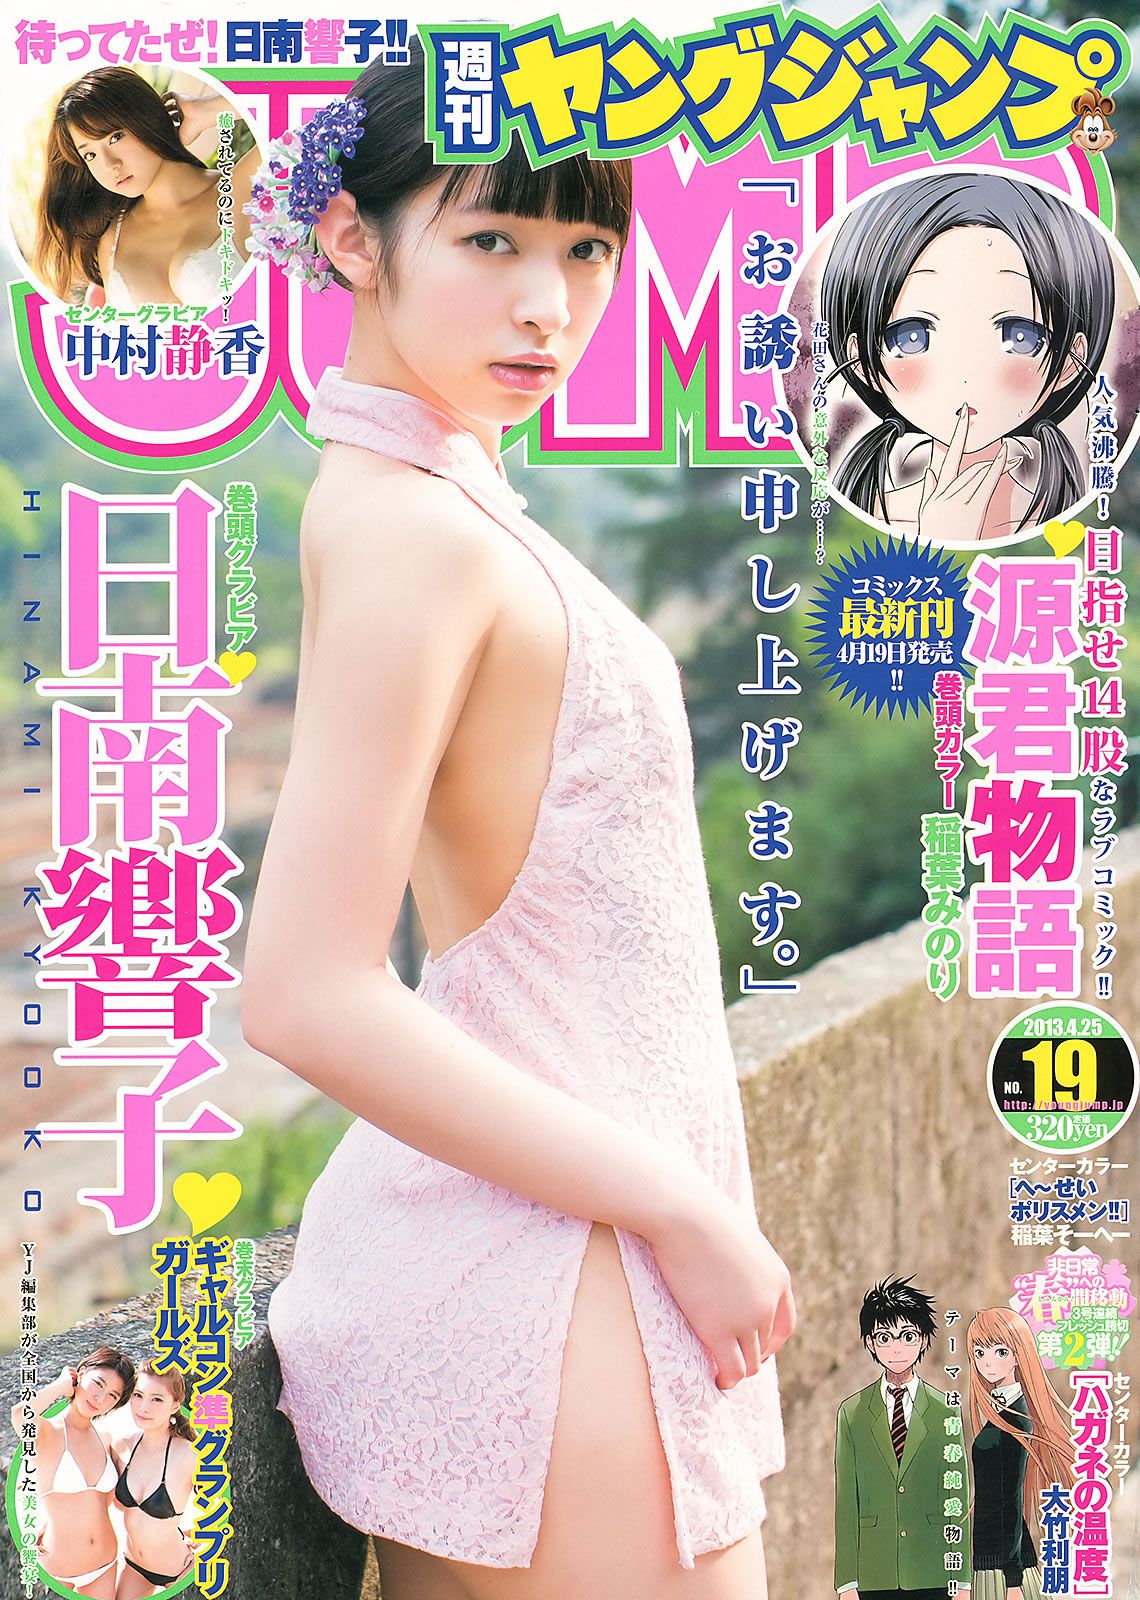 [Weekly Young Jump] 2013 No.18 19 日南響子 中村静香 モーニング娘。 西内まりや [28P]